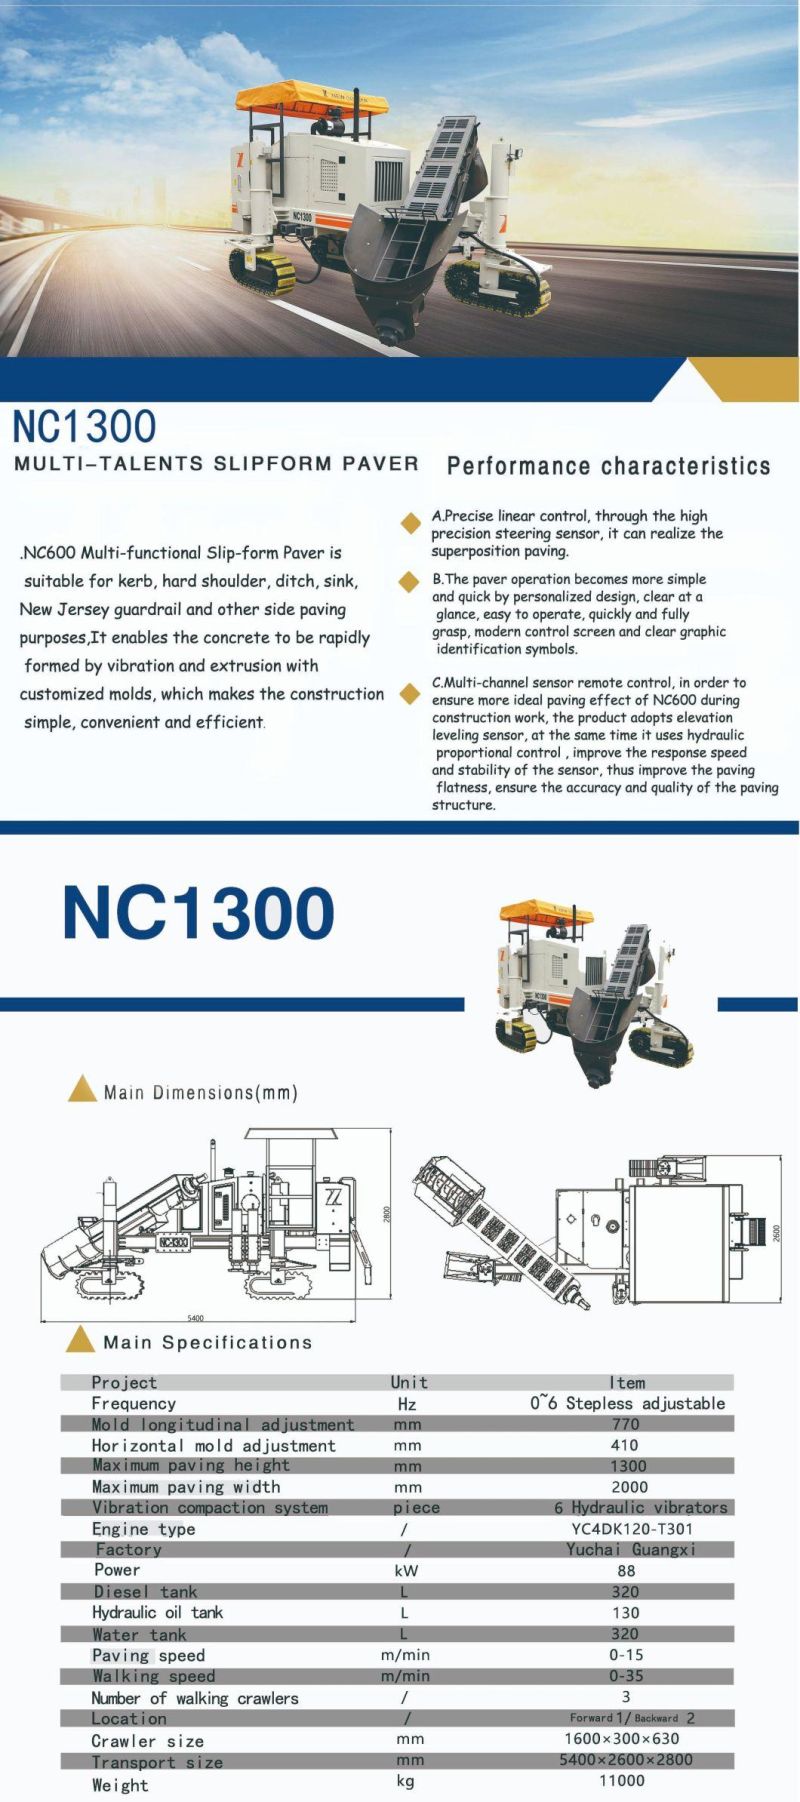 Automatic Concrete Curb Slipform Paver Nc1300 for Road Kerb and Gutter